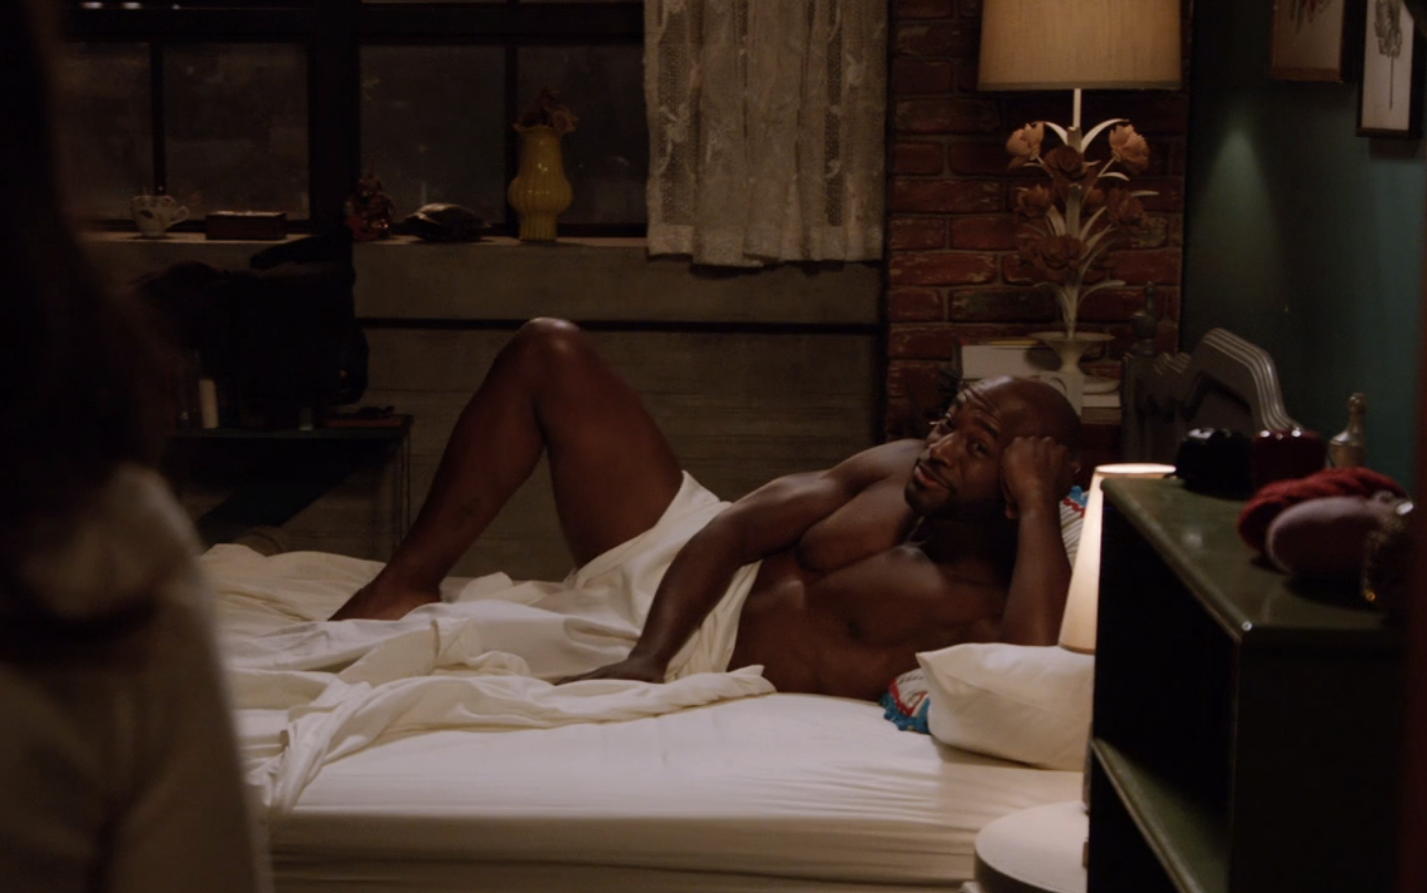 Taye Diggs in bed